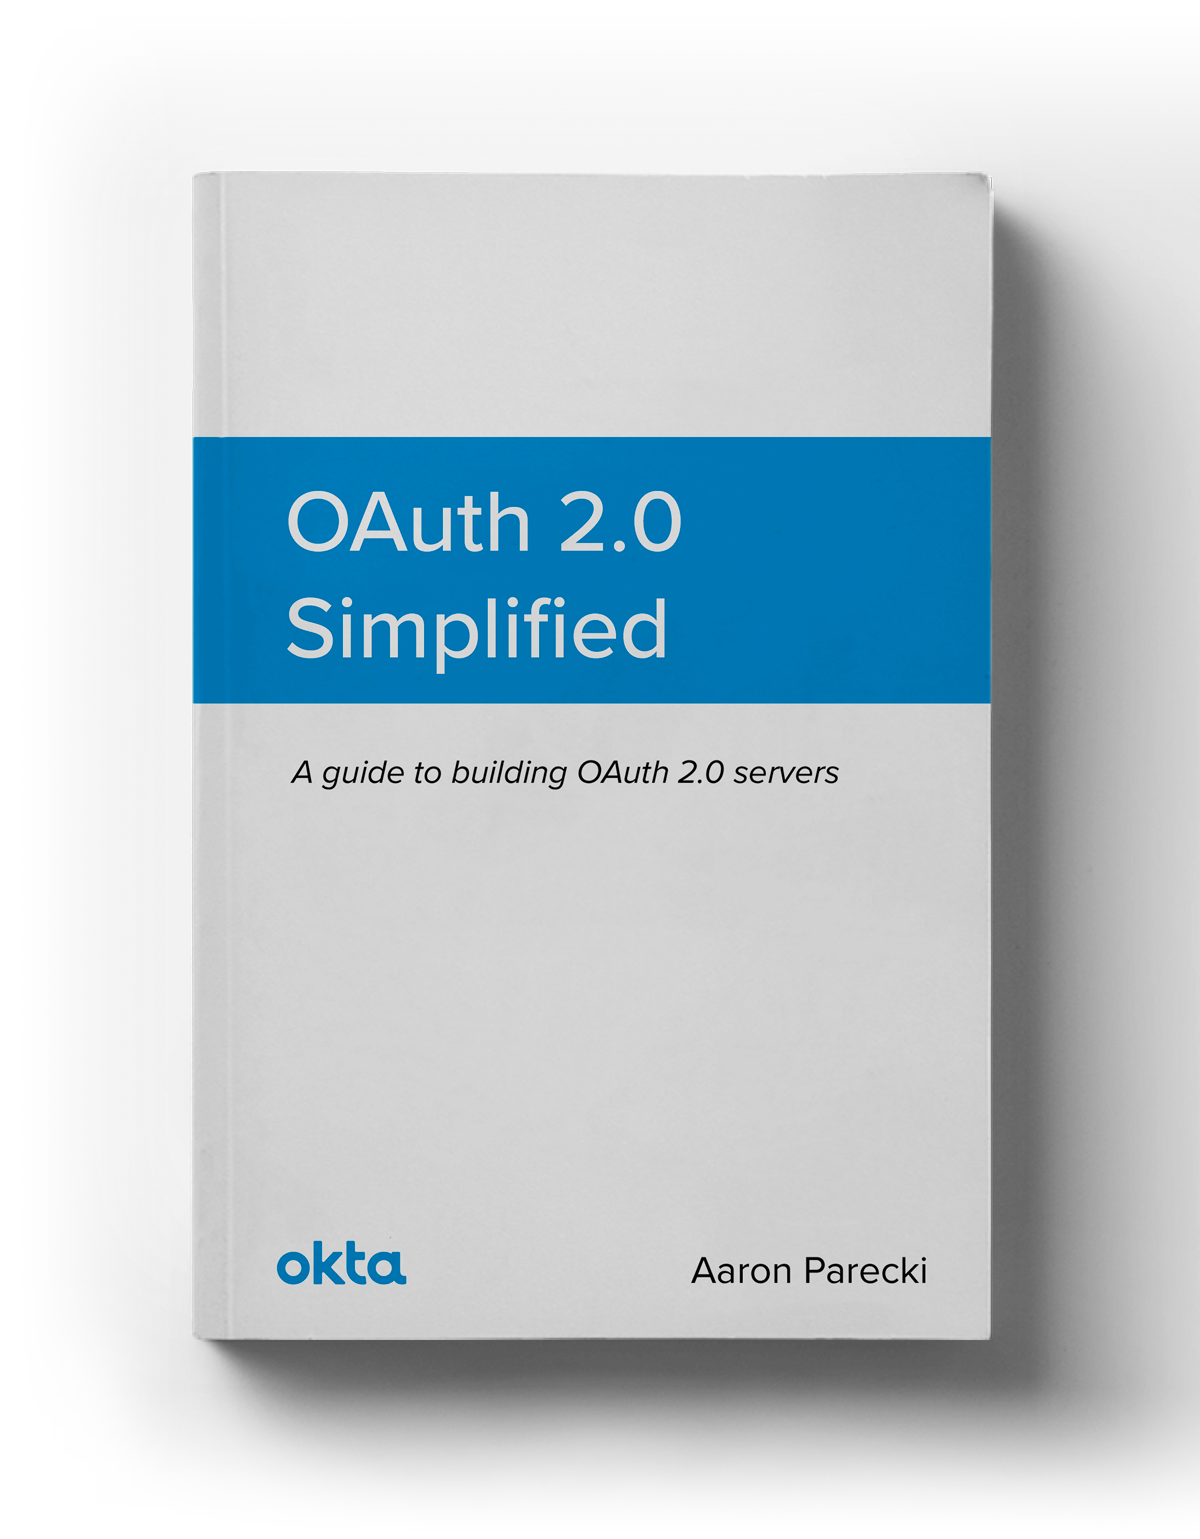 OAuth 2.0 Simplified Book Cover